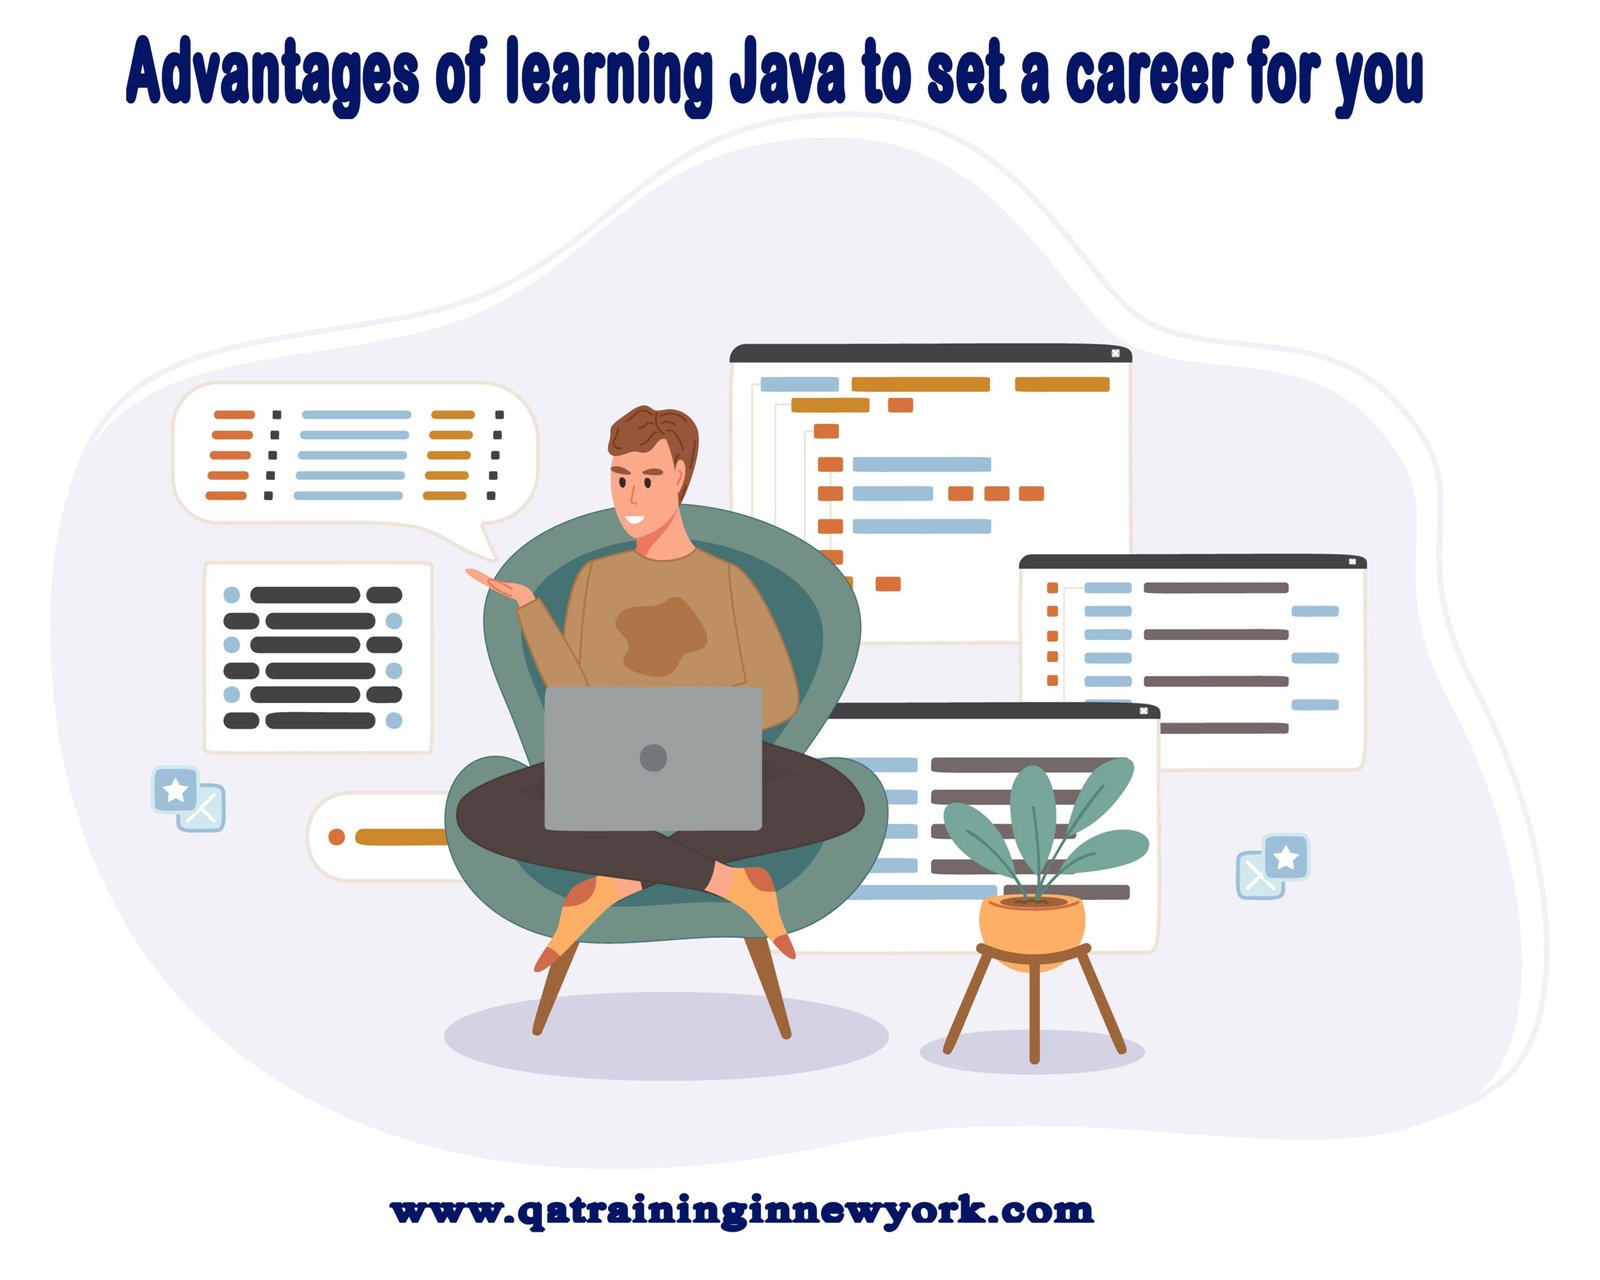 Advantages of learning Java to set a career for you